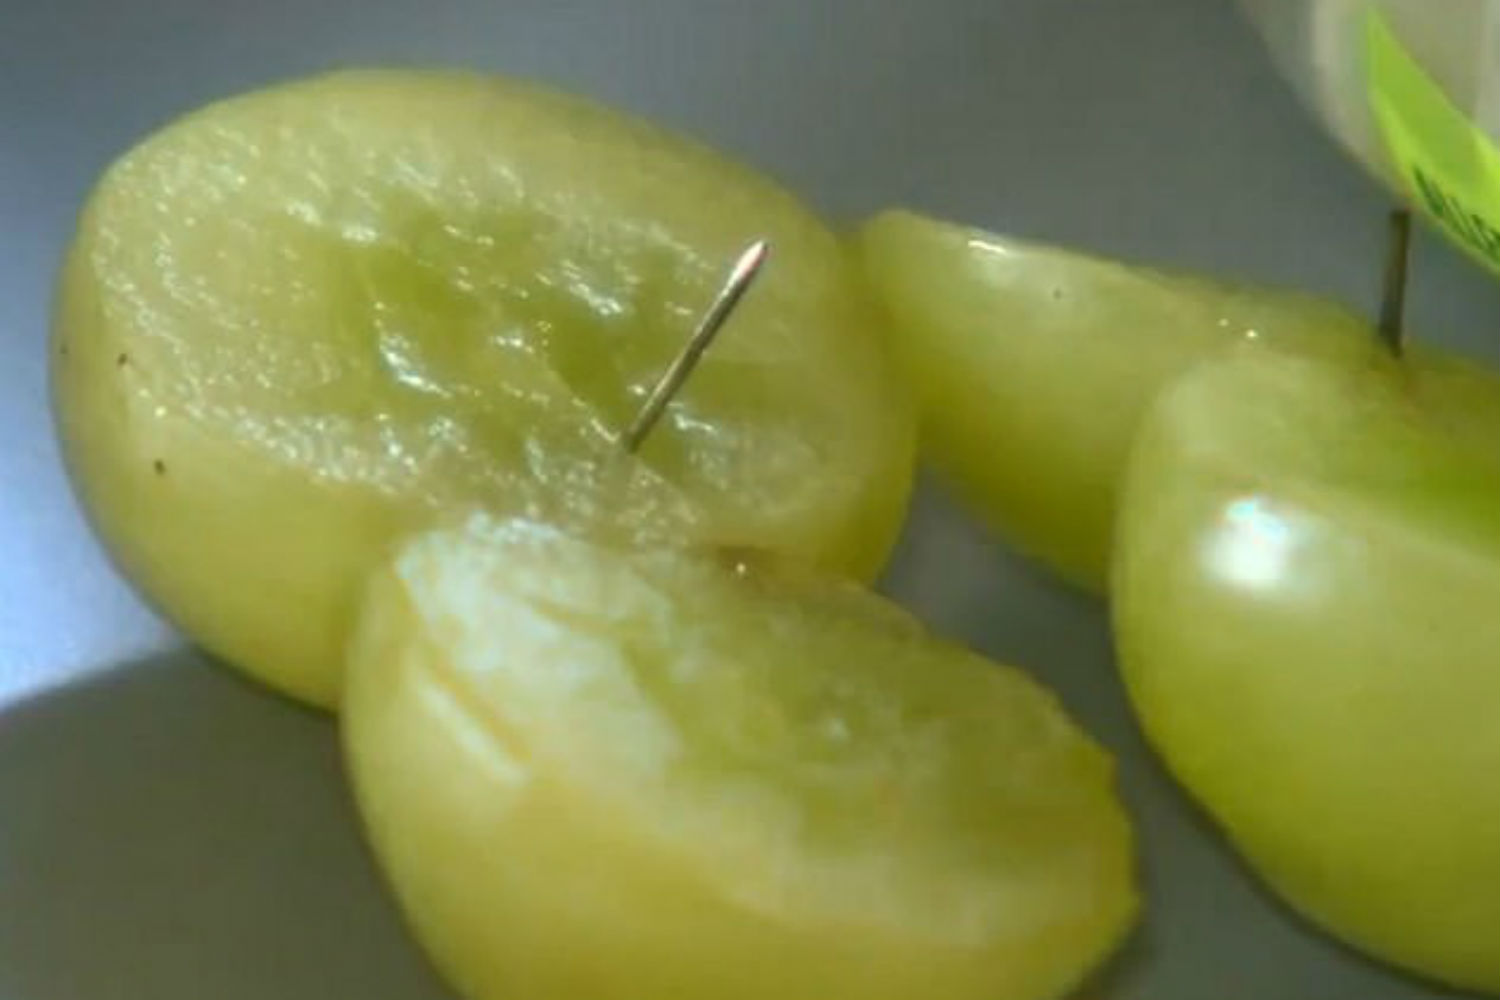 needle found in seedless grapes